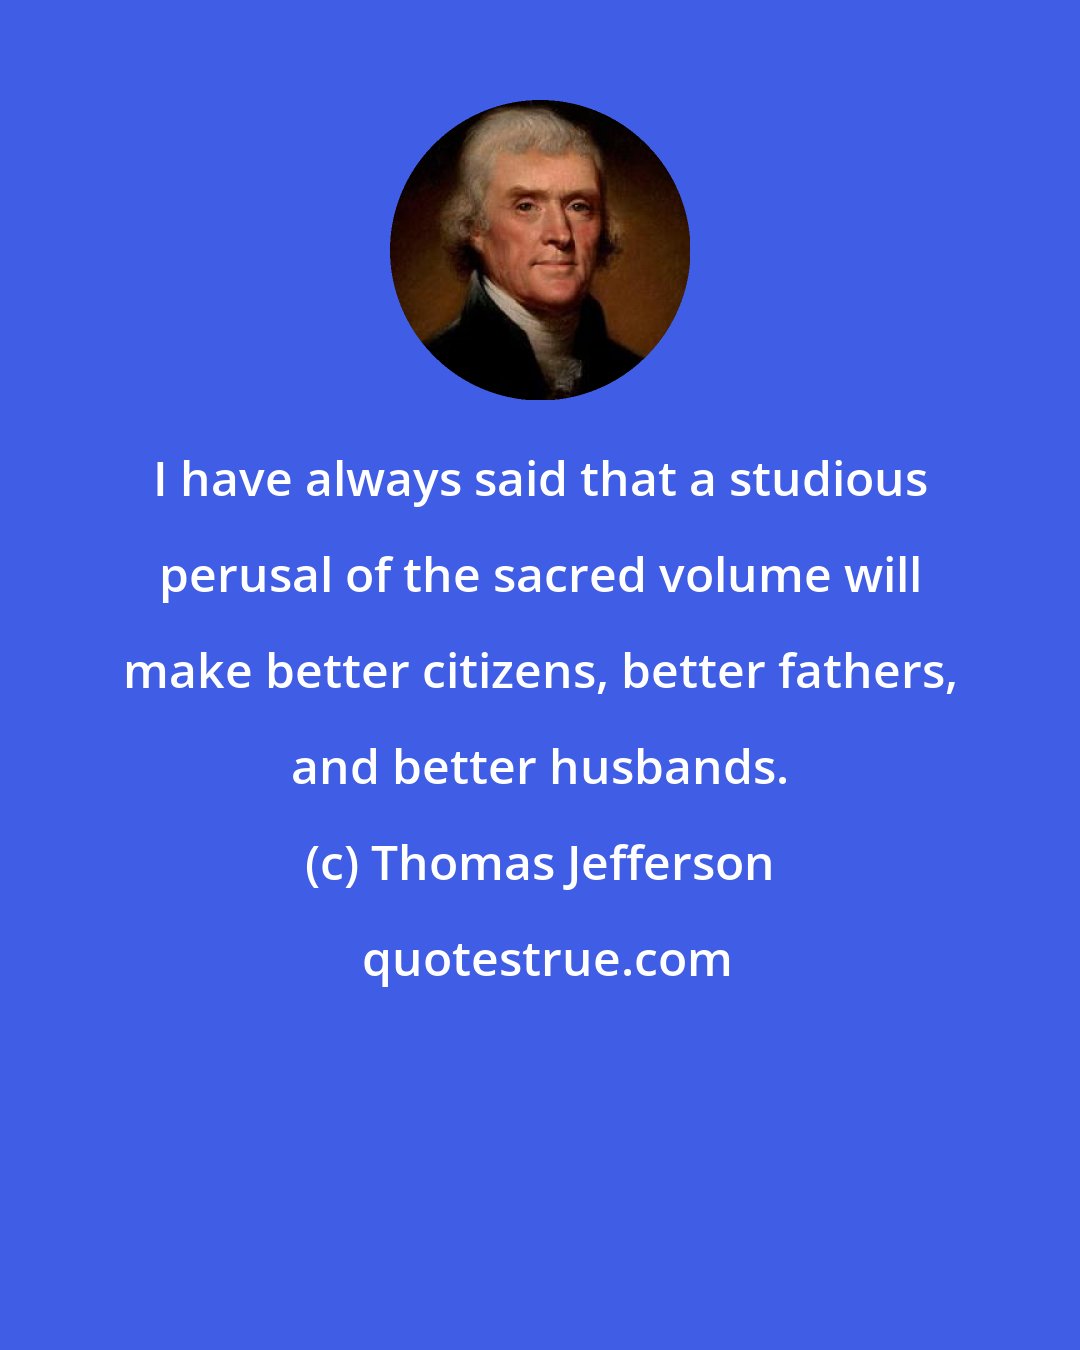 Thomas Jefferson: I have always said that a studious perusal of the sacred volume will make better citizens, better fathers, and better husbands.